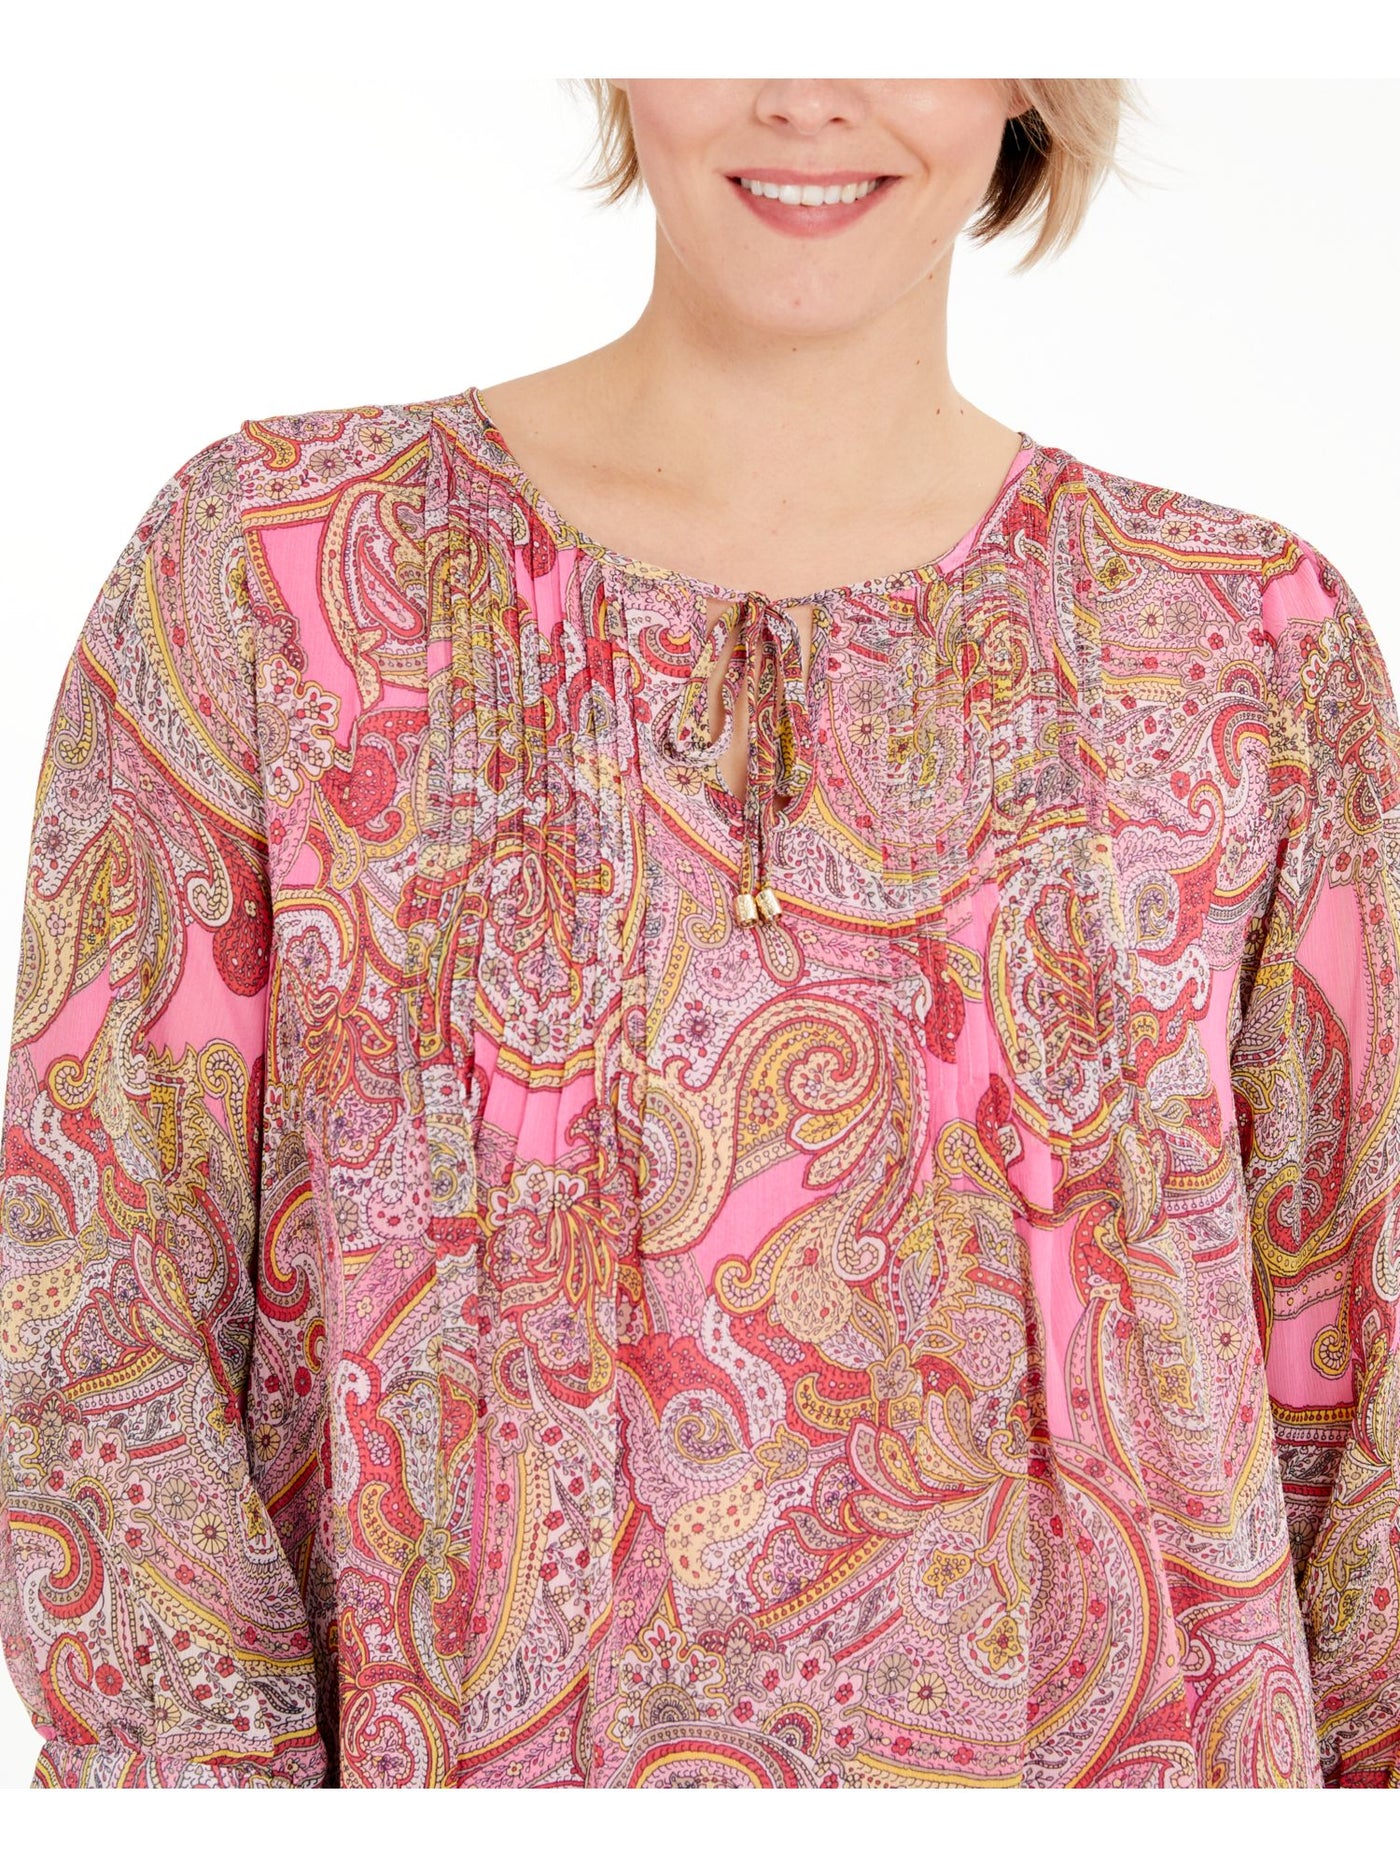 TOMMY HILFIGER Womens Pink Paisley Blouson Sleeve Tie Neck Wear To Work Top Plus 0X